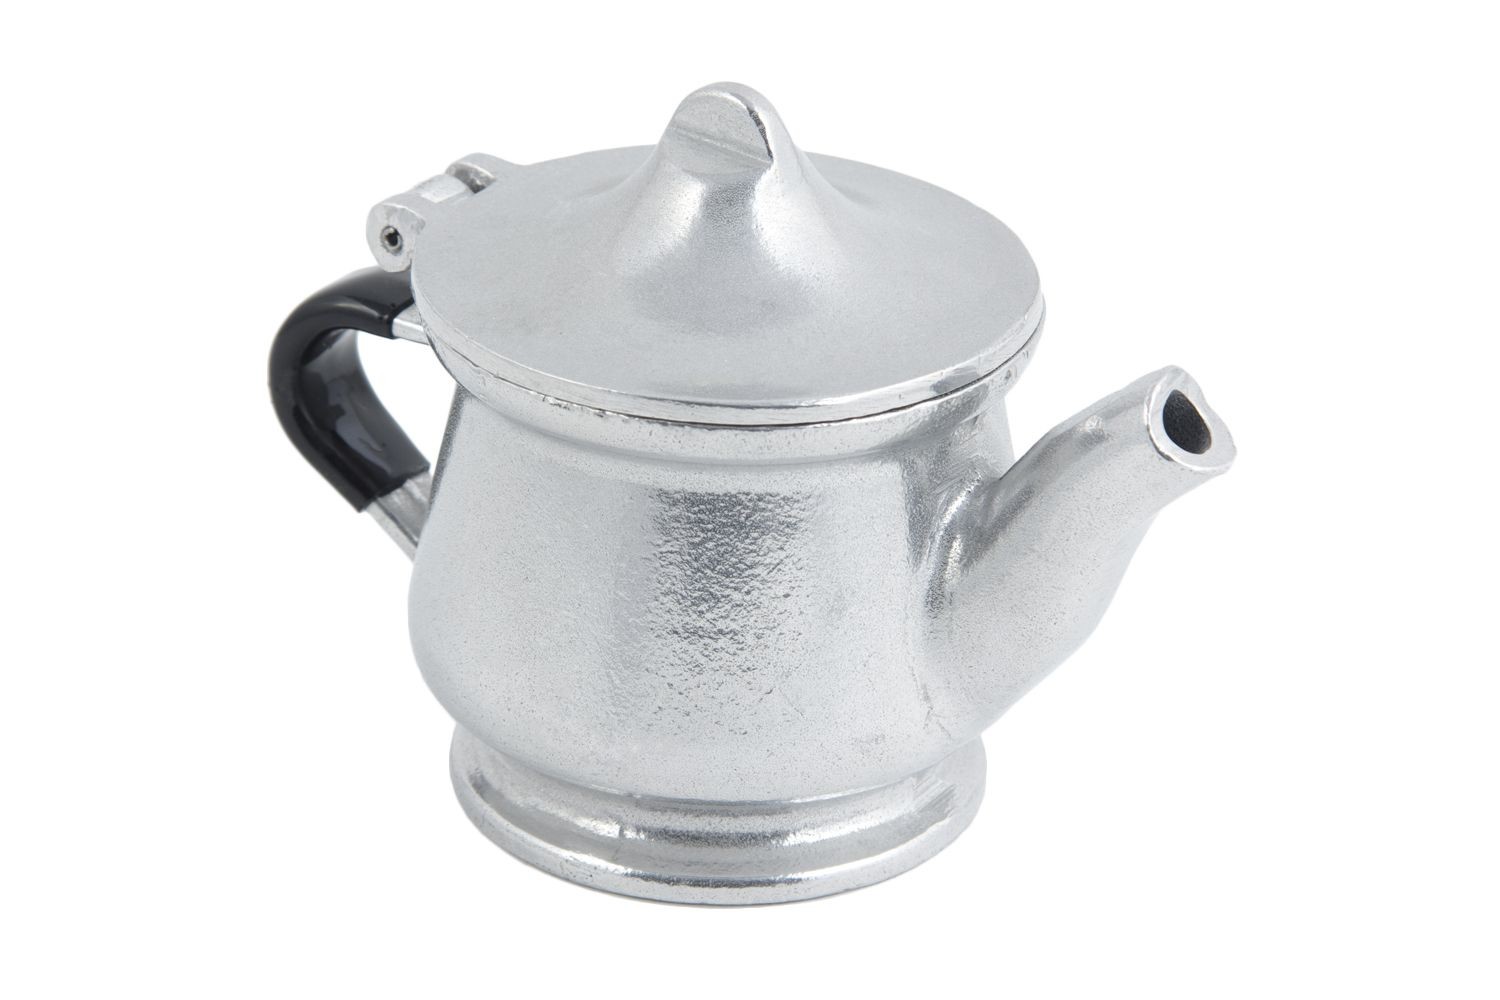 https://www.lionsdeal.com/itempics/Bon-Chef-4024P-Teapot-with-Insulated-Handle--Pewter-Glo-11-oz---Set-of-6-33035_xlarge.jpg